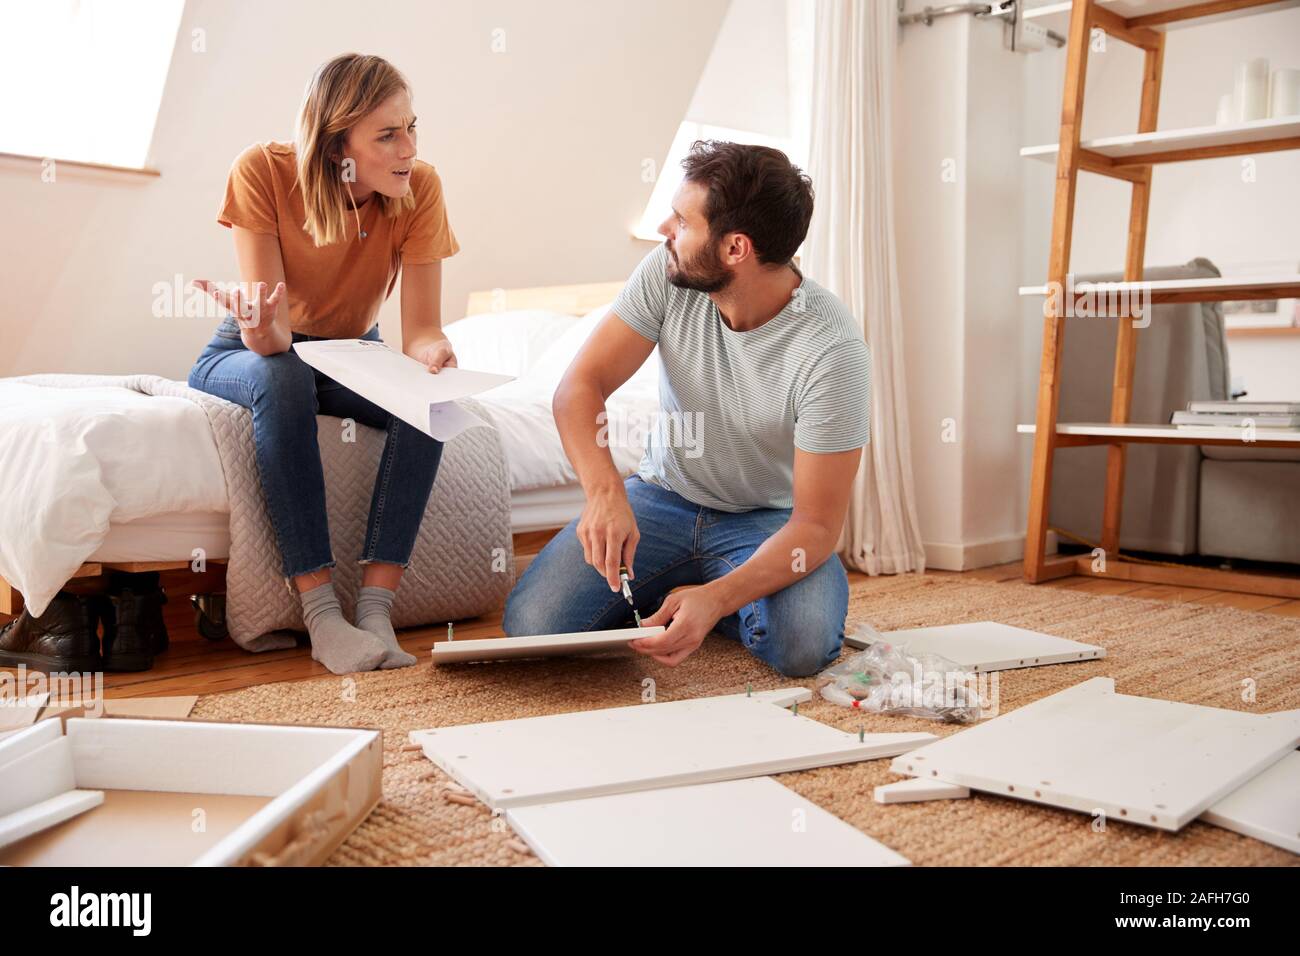 Couple Having Argument Whilst Putting Together Self Assembly Furniture Stock Photo